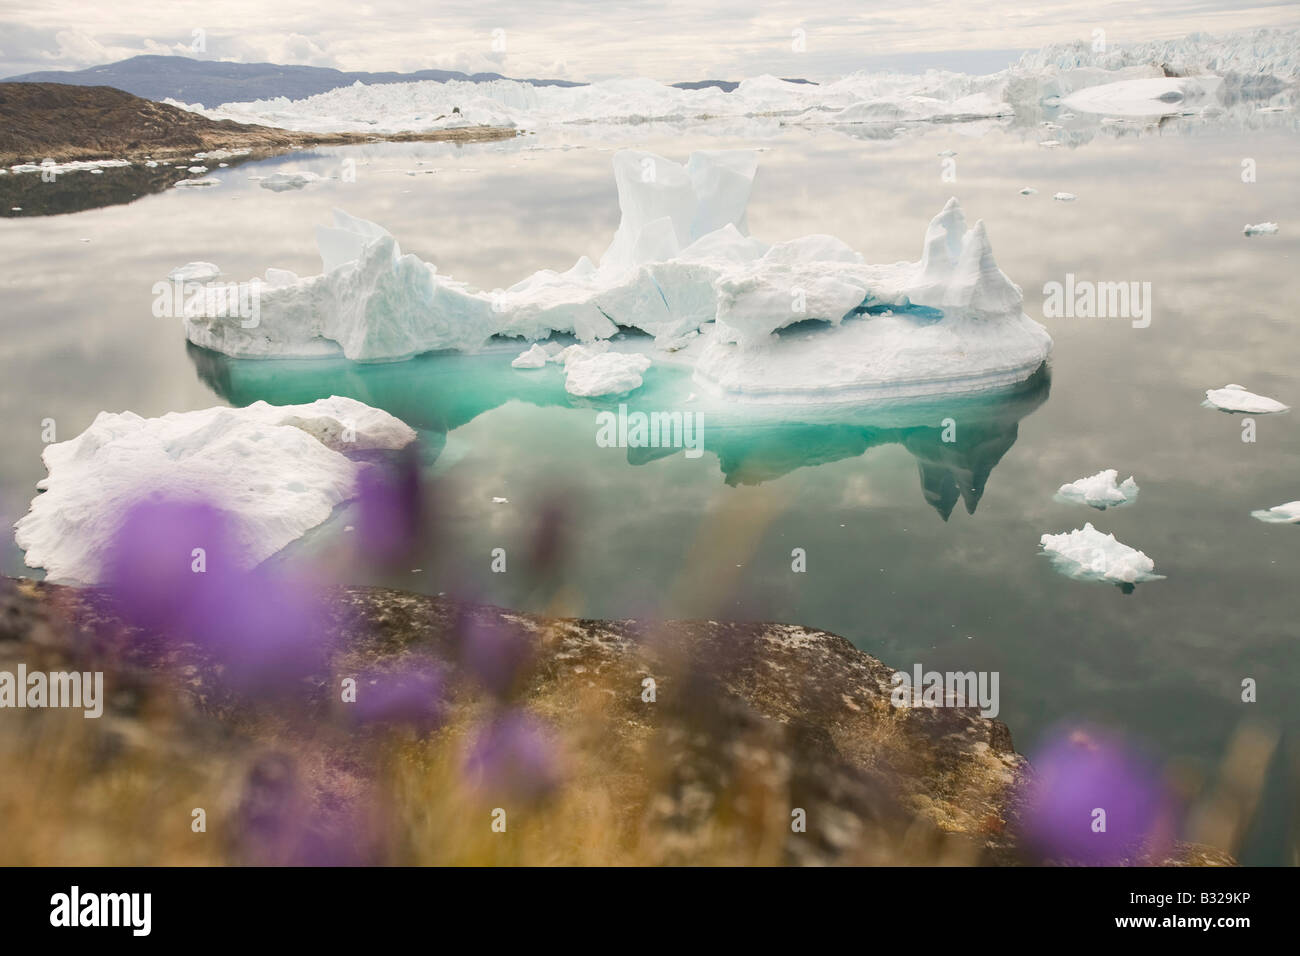 Icebergs in the Ilulissat ice fjord in Greenland Stock Photo